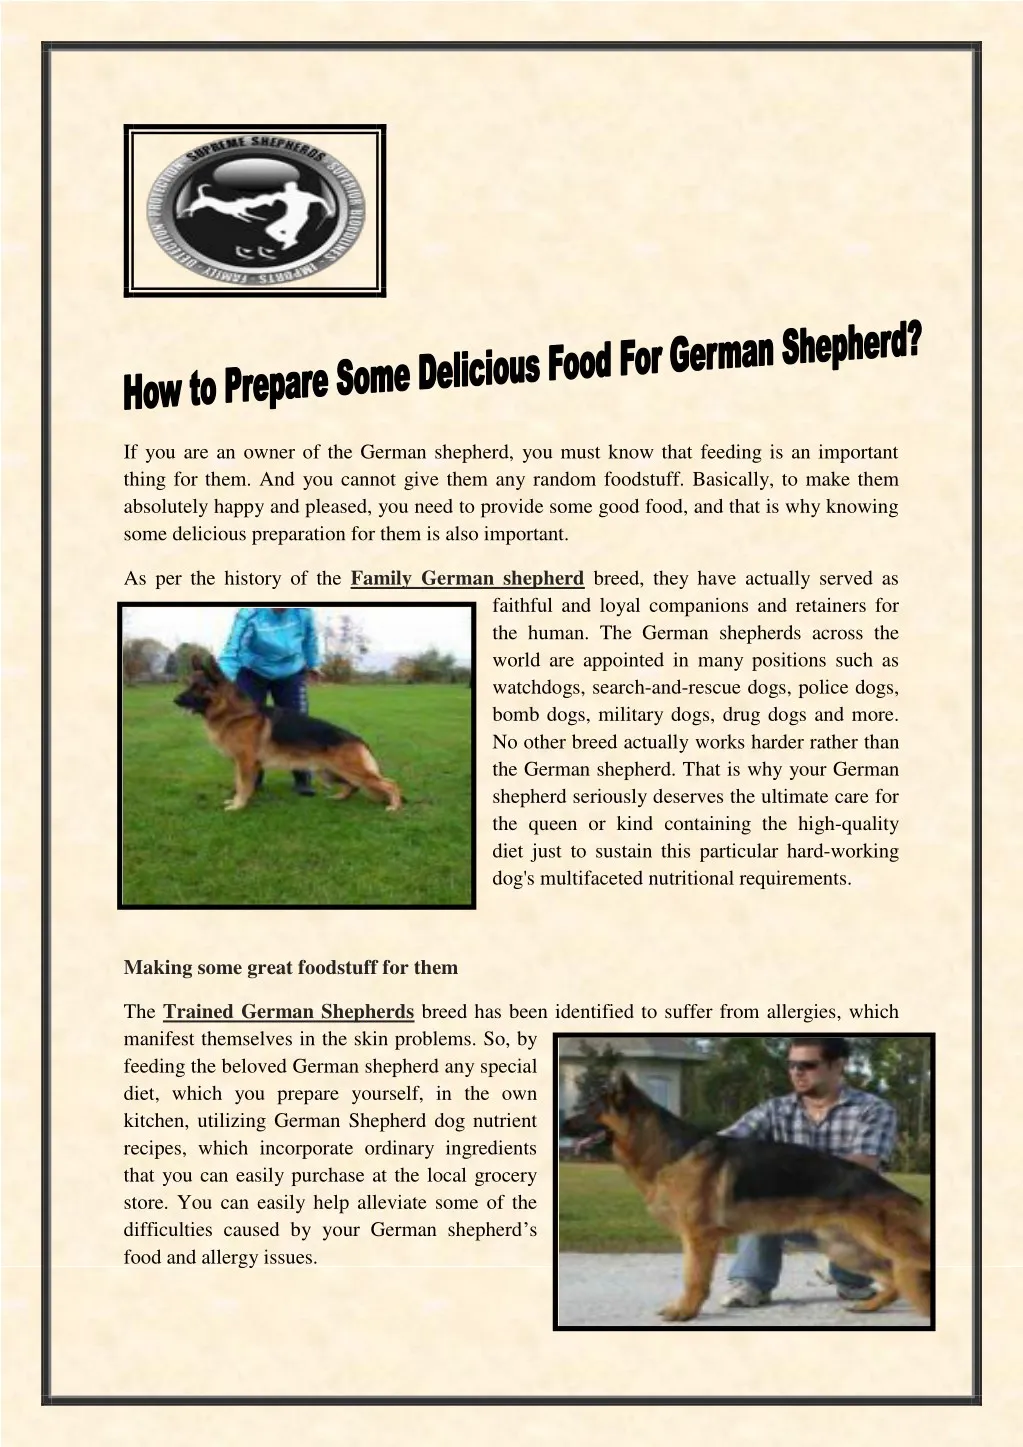 if you are an owner of the german shepherd